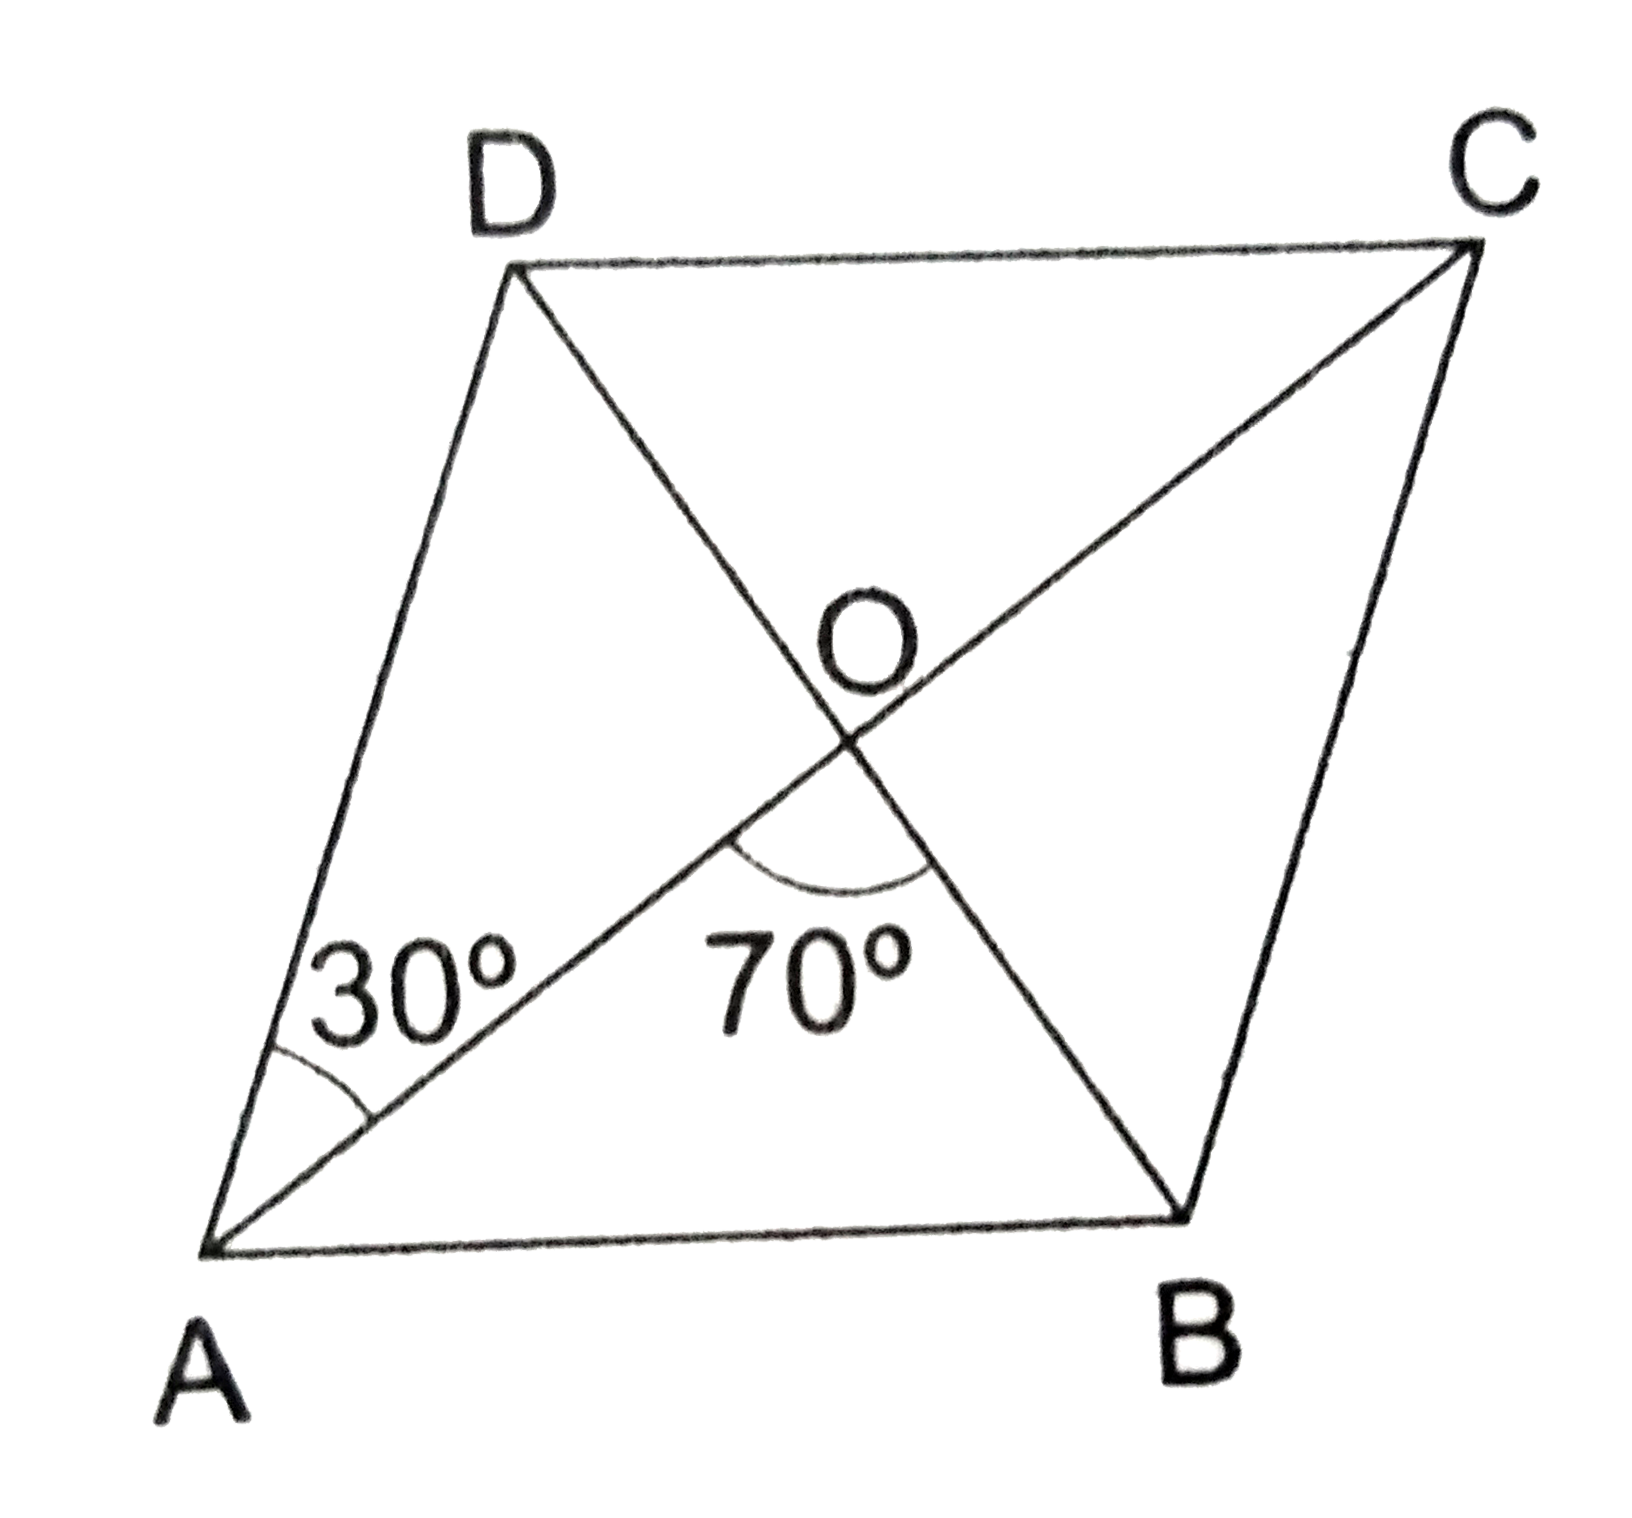 The diagonals AC and BD of a parallelogram ABCD intersect each other at the point O such that angle DAC =30^(@) and angle AOB=70^(@),